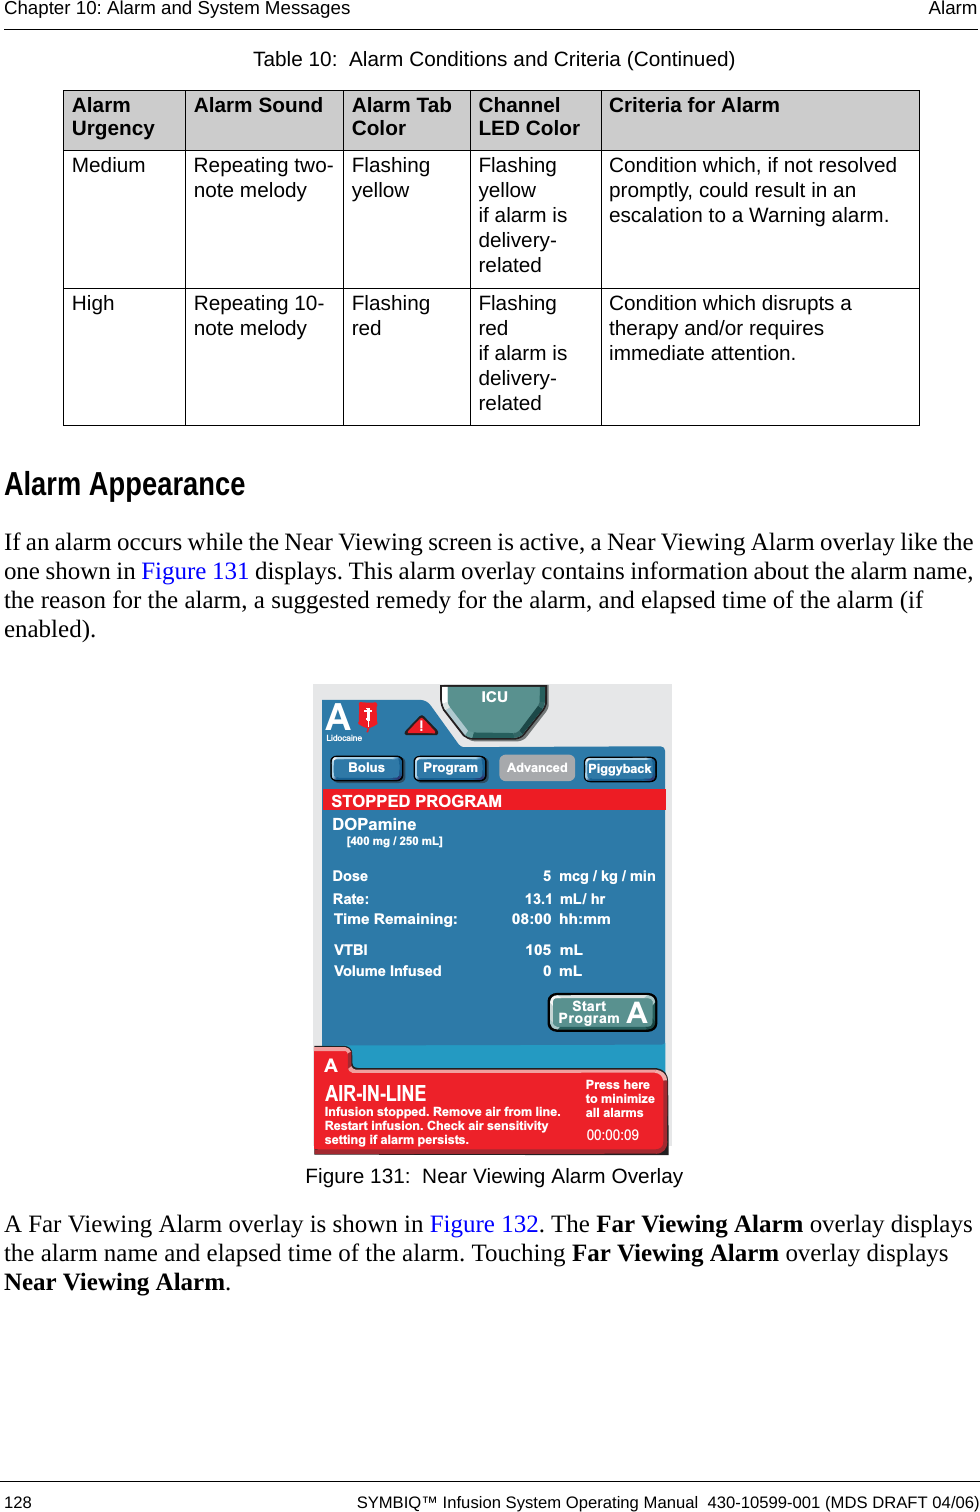  128 SYMBIQ™ Infusion System Operating Manual  430-10599-001 (MDS DRAFT 04/06)Chapter 10: Alarm and System Messages AlarmAlarm AppearanceIf an alarm occurs while the Near Viewing screen is active, a Near Viewing Alarm overlay like the one shown in Figure 131 displays. This alarm overlay contains information about the alarm name, the reason for the alarm, a suggested remedy for the alarm, and elapsed time of the alarm (if enabled). Figure 131:  Near Viewing Alarm OverlayA Far Viewing Alarm overlay is shown in Figure 132. The Far Viewing Alarm overlay displays the alarm name and elapsed time of the alarm. Touching Far Viewing Alarm overlay displays Near Viewing Alarm.Medium Repeating two-note melody Flashing yellow Flashing yellow if alarm is delivery-relatedCondition which, if not resolved promptly, could result in an escalation to a Warning alarm.High Repeating 10-note melody Flashing red Flashing redif alarm is delivery-relatedCondition which disrupts a therapy and/or requires immediate attention. Table 10:  Alarm Conditions and Criteria (Continued)Alarm Urgency Alarm Sound Alarm Tab Color Channel LED Color Criteria for AlarmAdvancedSTOPPED PROGRAMBolus ProgramPiggybackICUStartProgram AA!LidocaineInfusion stopped. Remove air from line.Restart infusion. Check air sensitivitysetting if alarm persists.Press hereto minimizeall alarmsAIR-IN-LINE00:00:09Rate:Dose13.1 mL/hr5 mcg/kg/minRepeat?DOPamine[400 mg / 250 mL]VTBIVolume InfusedTime Remaining:105 mL0mL08:00 hh:mmA